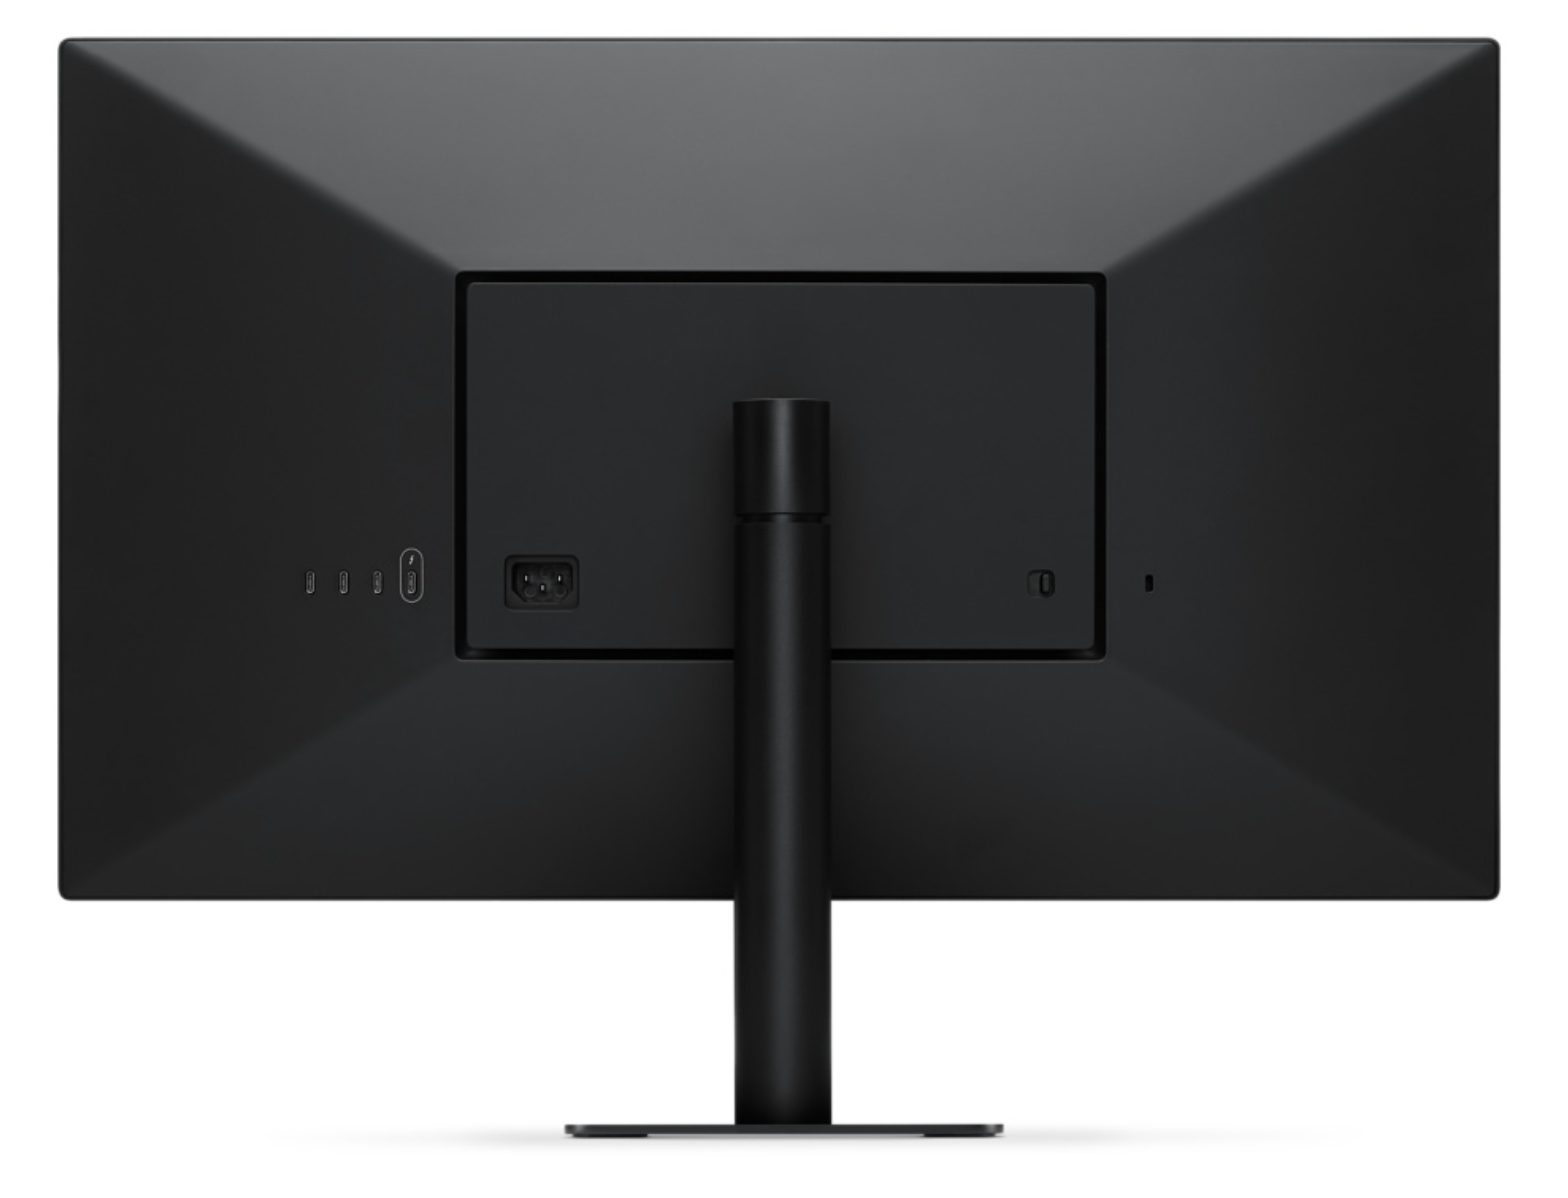 The 5K LG UltraFine is the external display Apple didn't want to make